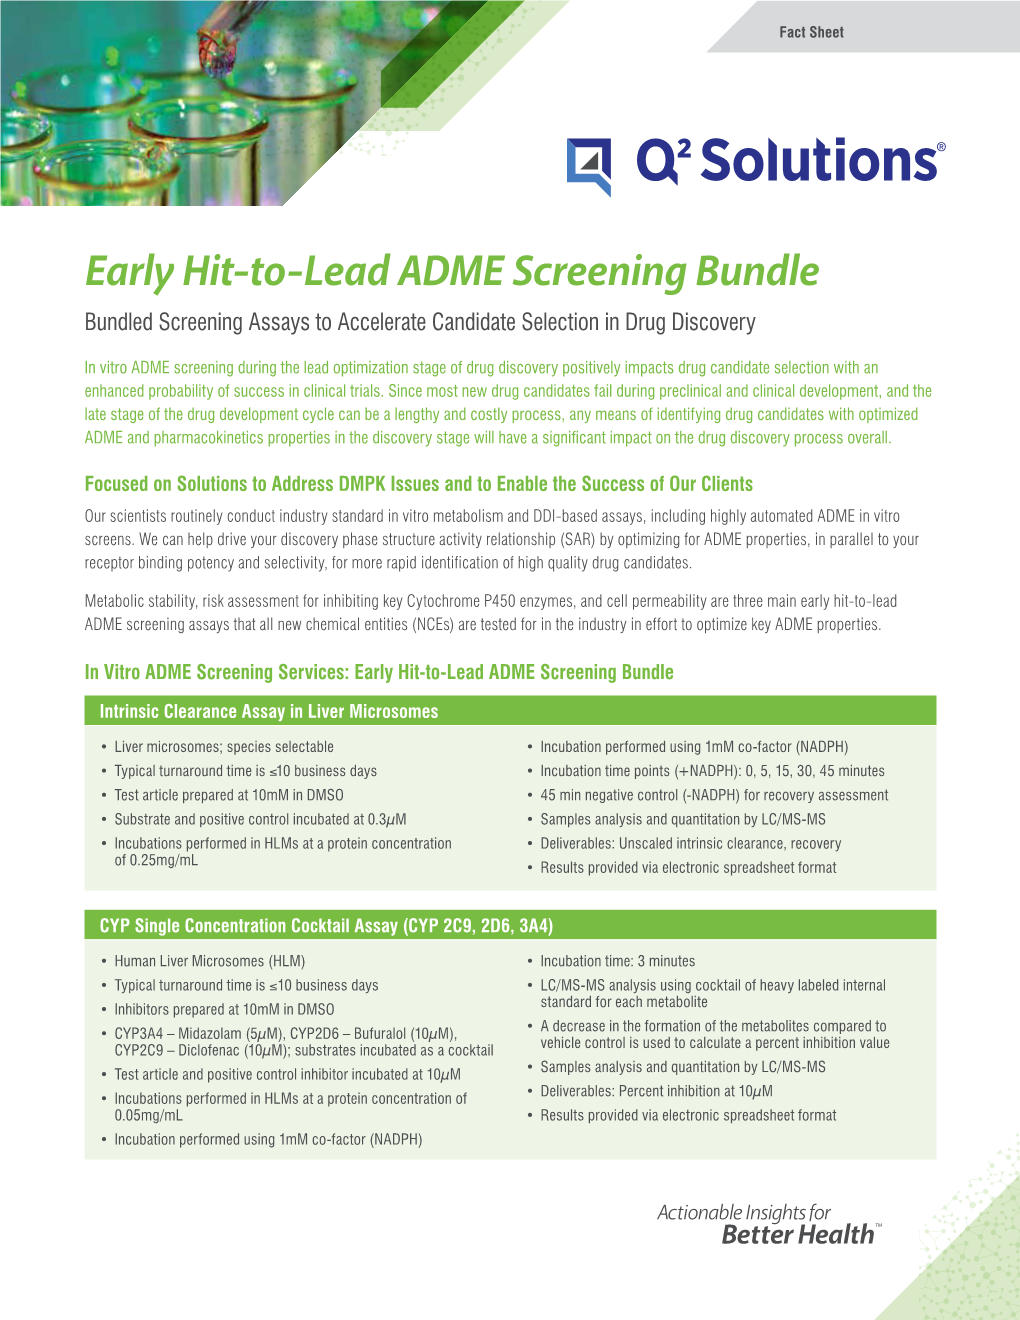 Early Hit-To-Lead ADME Screening Bundle Bundled Screening Assays to Accelerate Candidate Selection in Drug Discovery